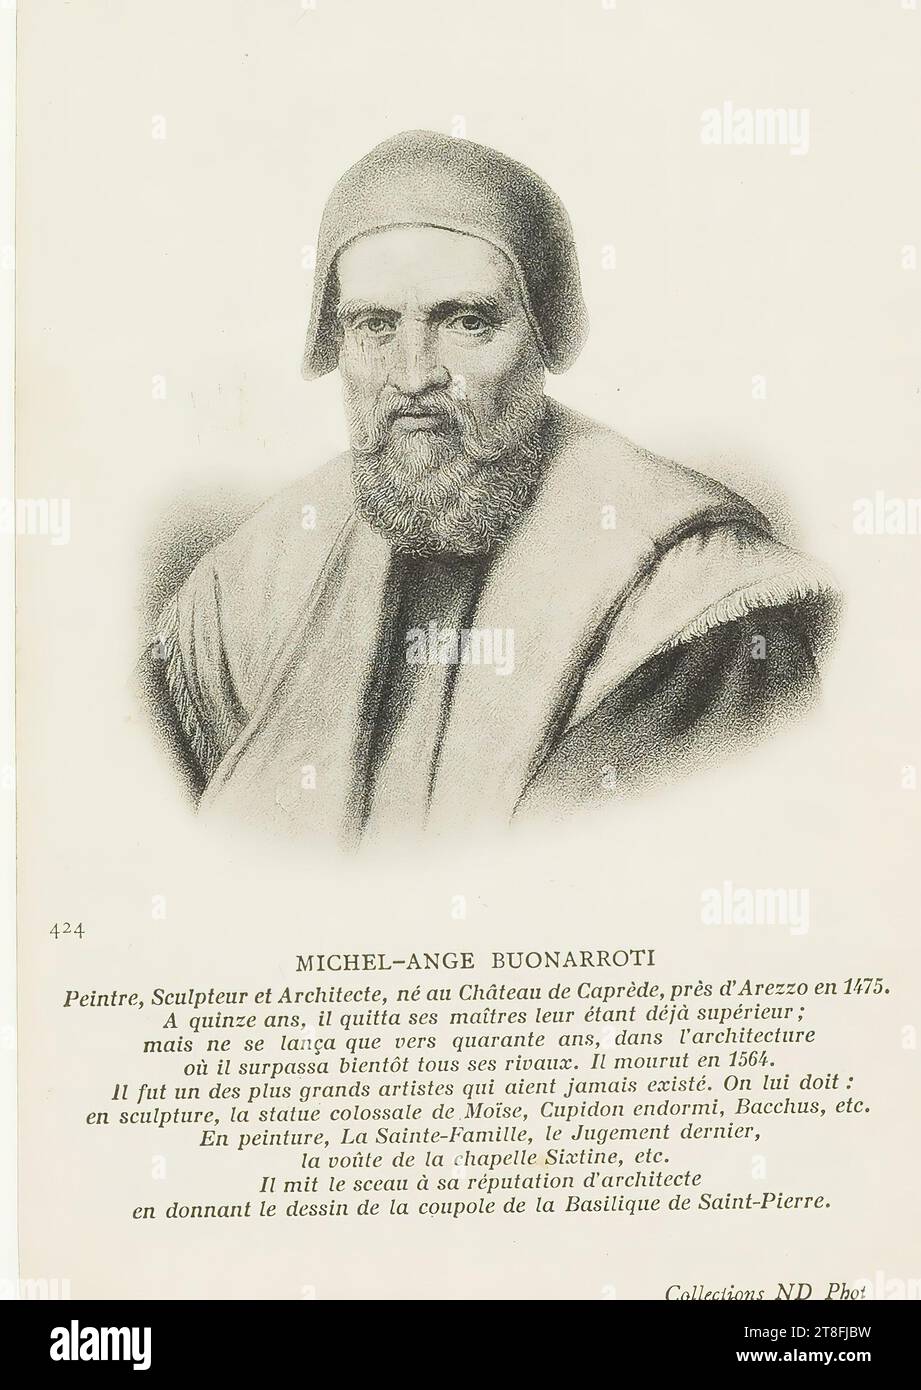 postcard. 424. MICHEL-ANGE BUONAROTTI, Painter, Sculptor, born at the Castle of Caprède, near Arezzo in 1475, At fifteen, he left his masters keur being already superior;, but only launched around forty, in the architecture, where he soon surpassed all his rivals. He died in 1564, He was one of the greatest artists who ever existed. We owe him:, in sculpture, the colossal statue of Moses, Sleeping Cupid, Bacchus, etc., In painting, The Holy Family, the Last Judgment, the vault of the Sistine Chapel, etc., He put the seal on his reputation as a architect Stock Photo